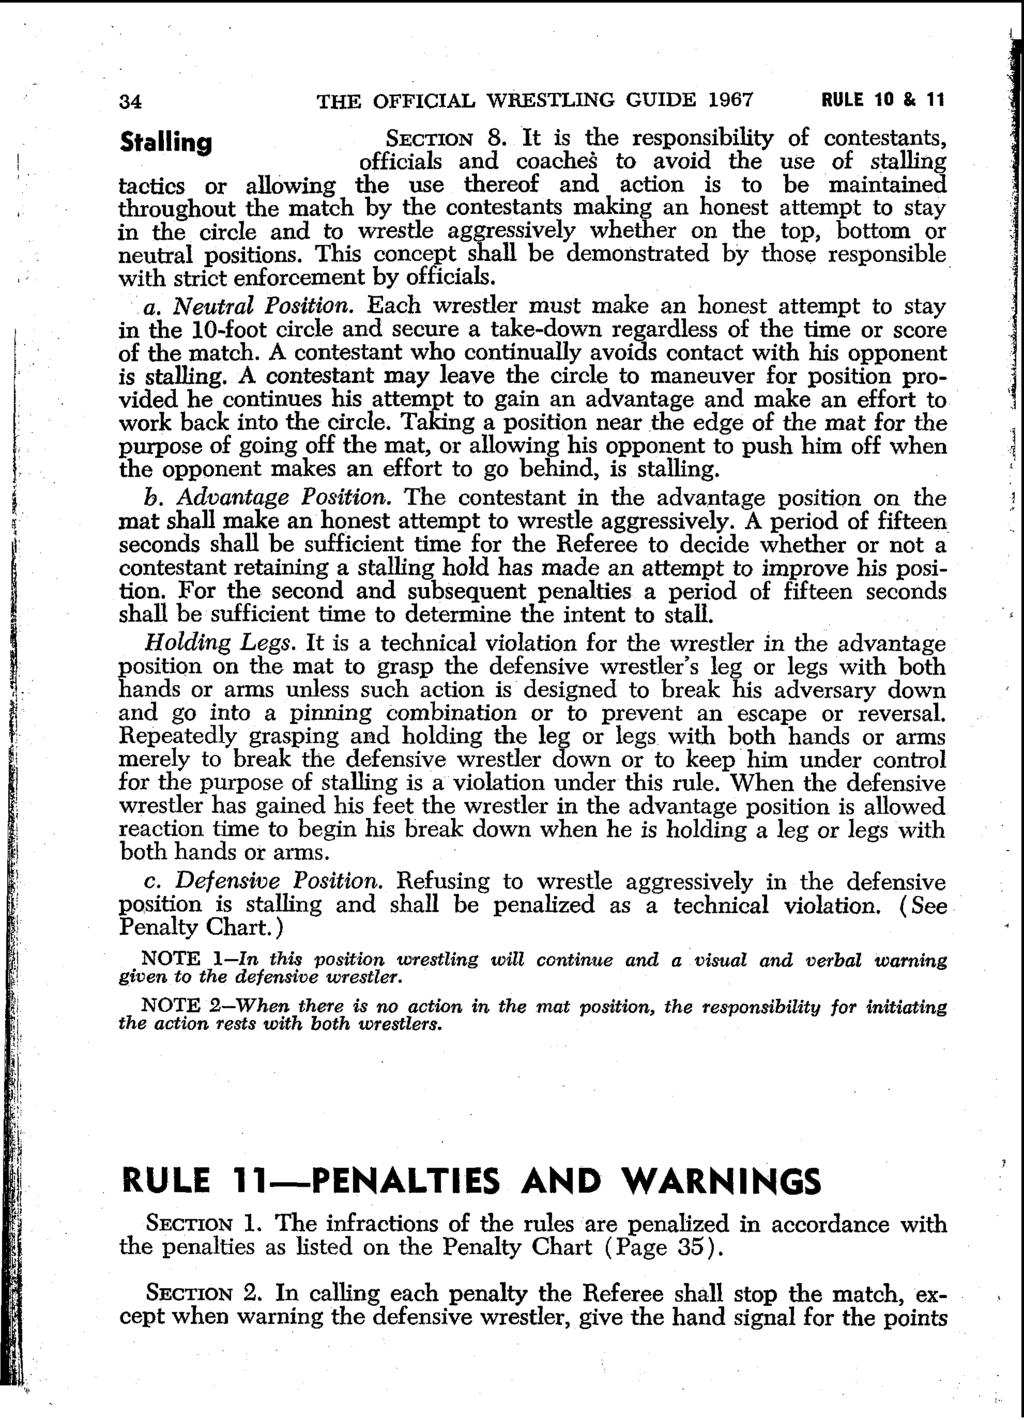 34 THE OFFICIAL WRESTLING GUIDE 1967 RULE 10 & 11 Stalling SECTION 8.